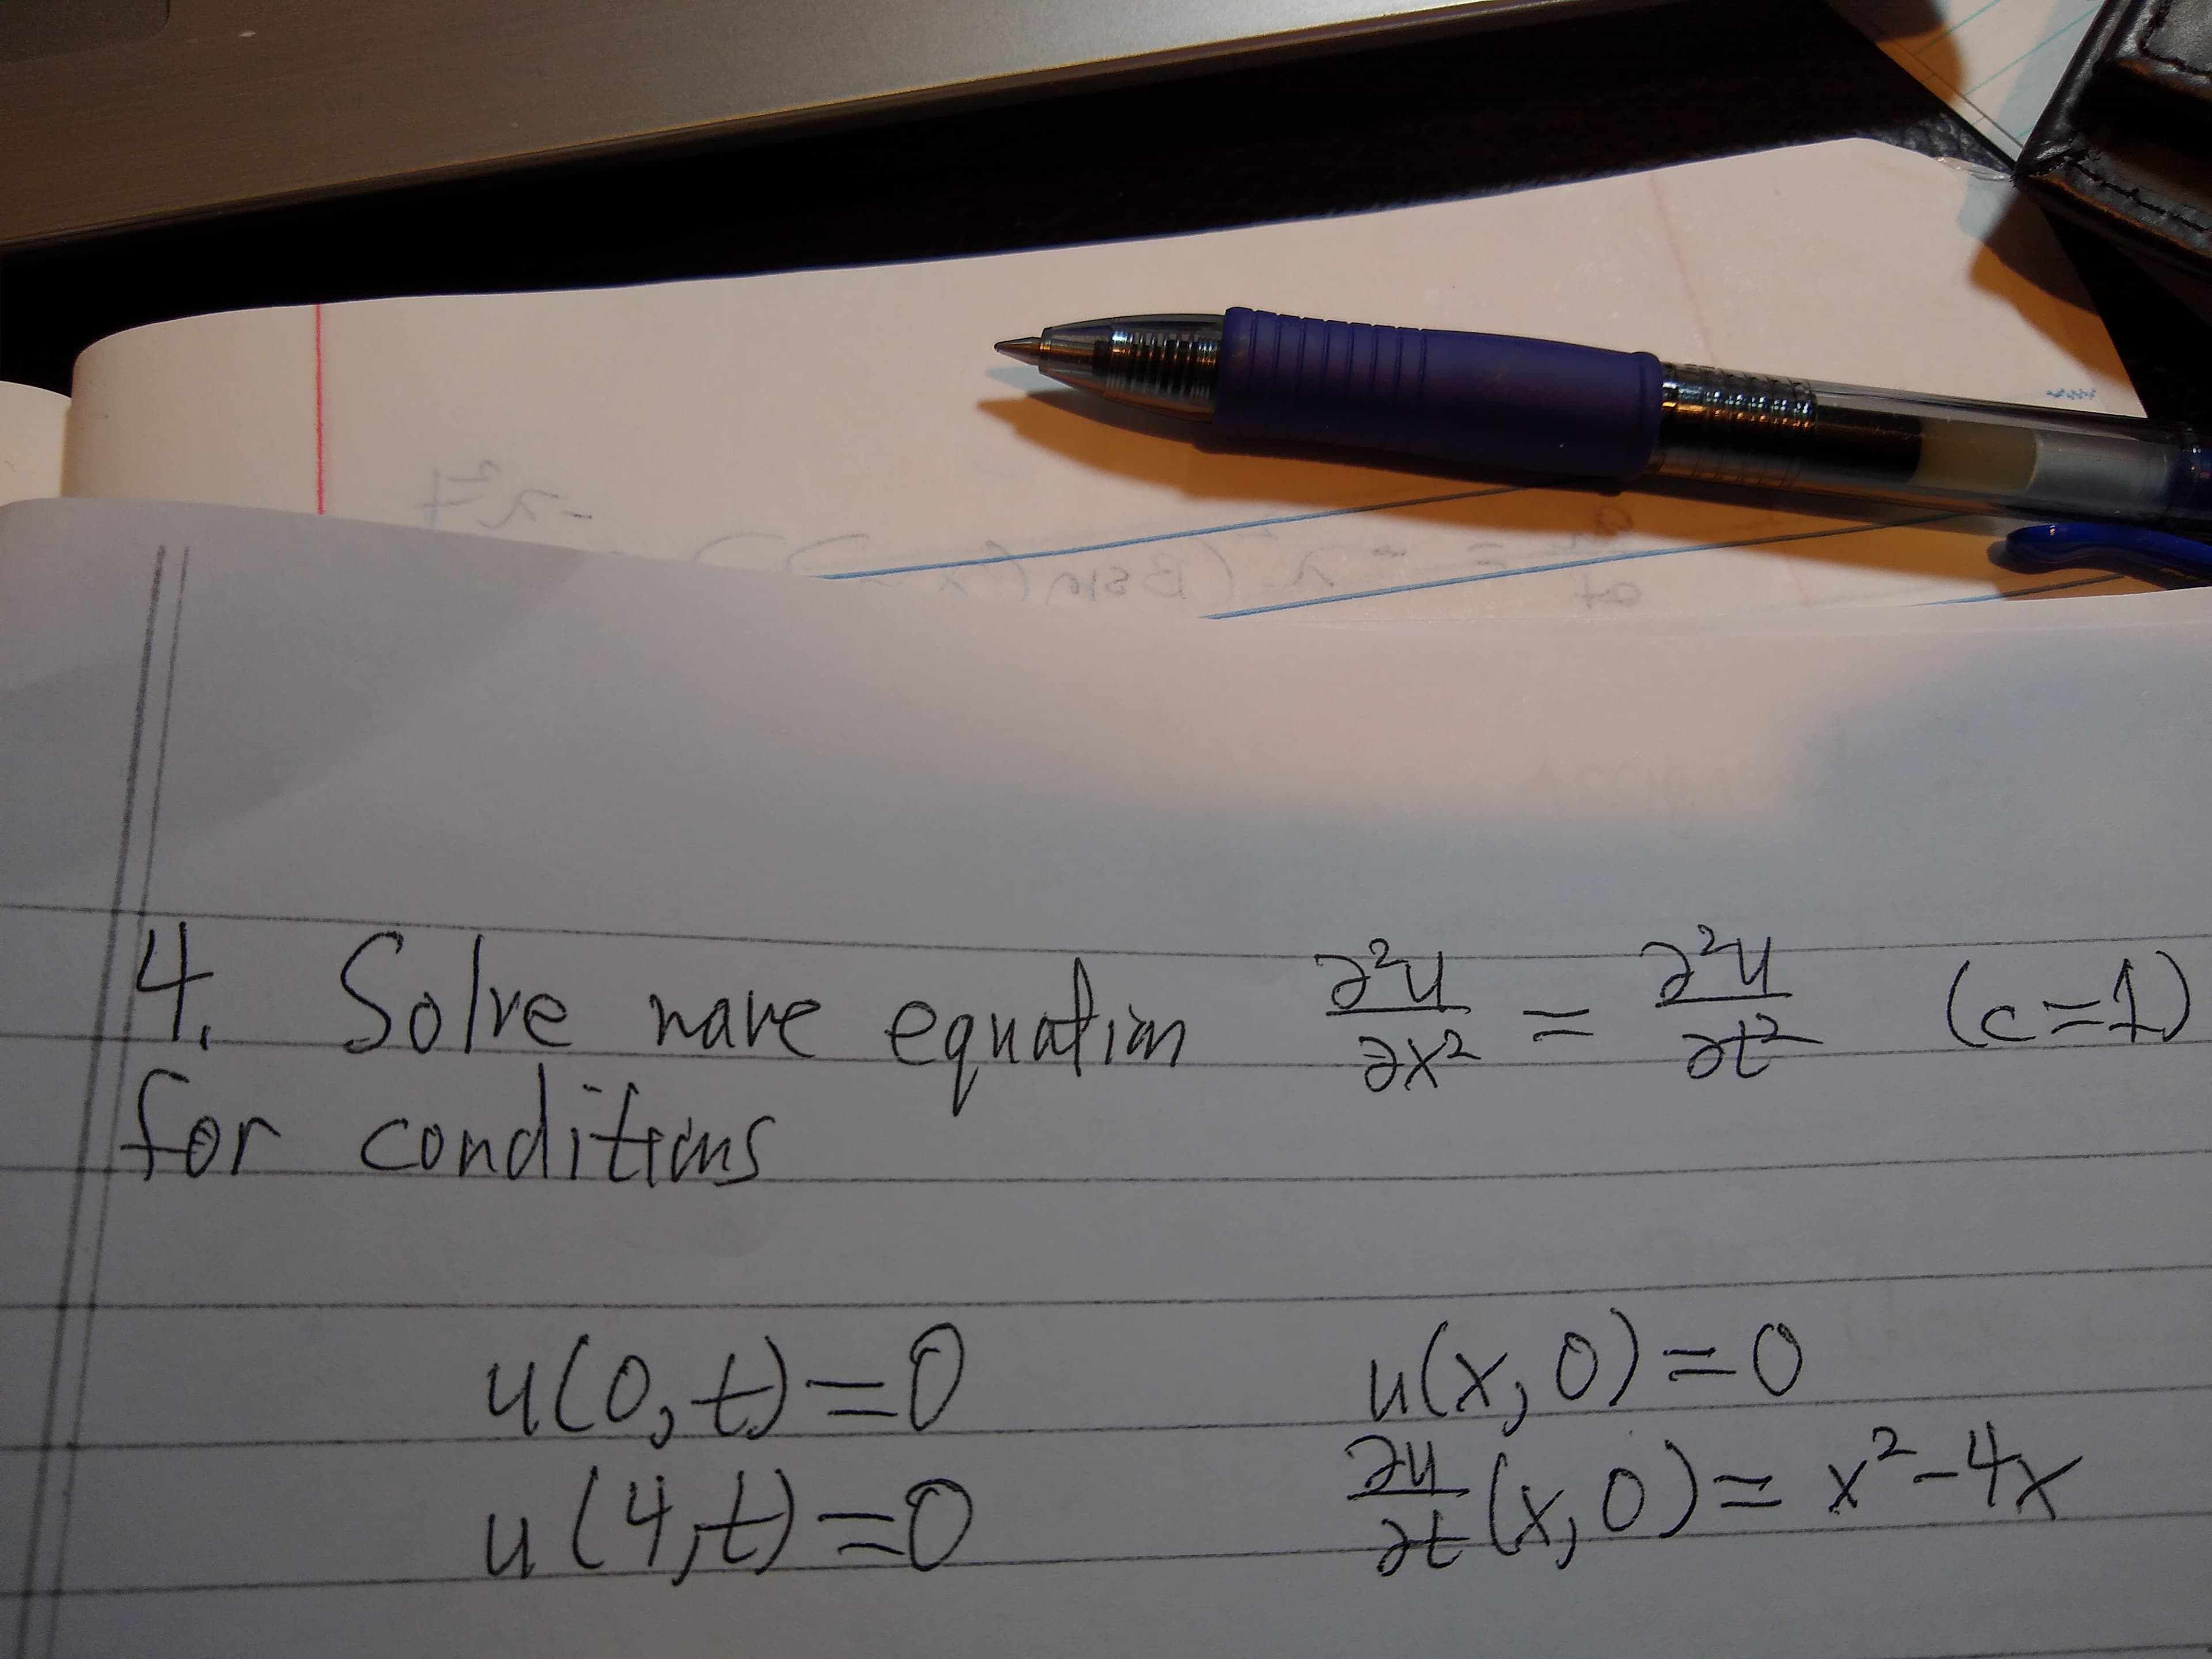 to
4. Solve nare eguatim e =
for conditins
nave equation
(c=4)
ulx,0)3D0
#4,0)=Dx²-4x
ul0,0=D0
t.
u14)=D0
